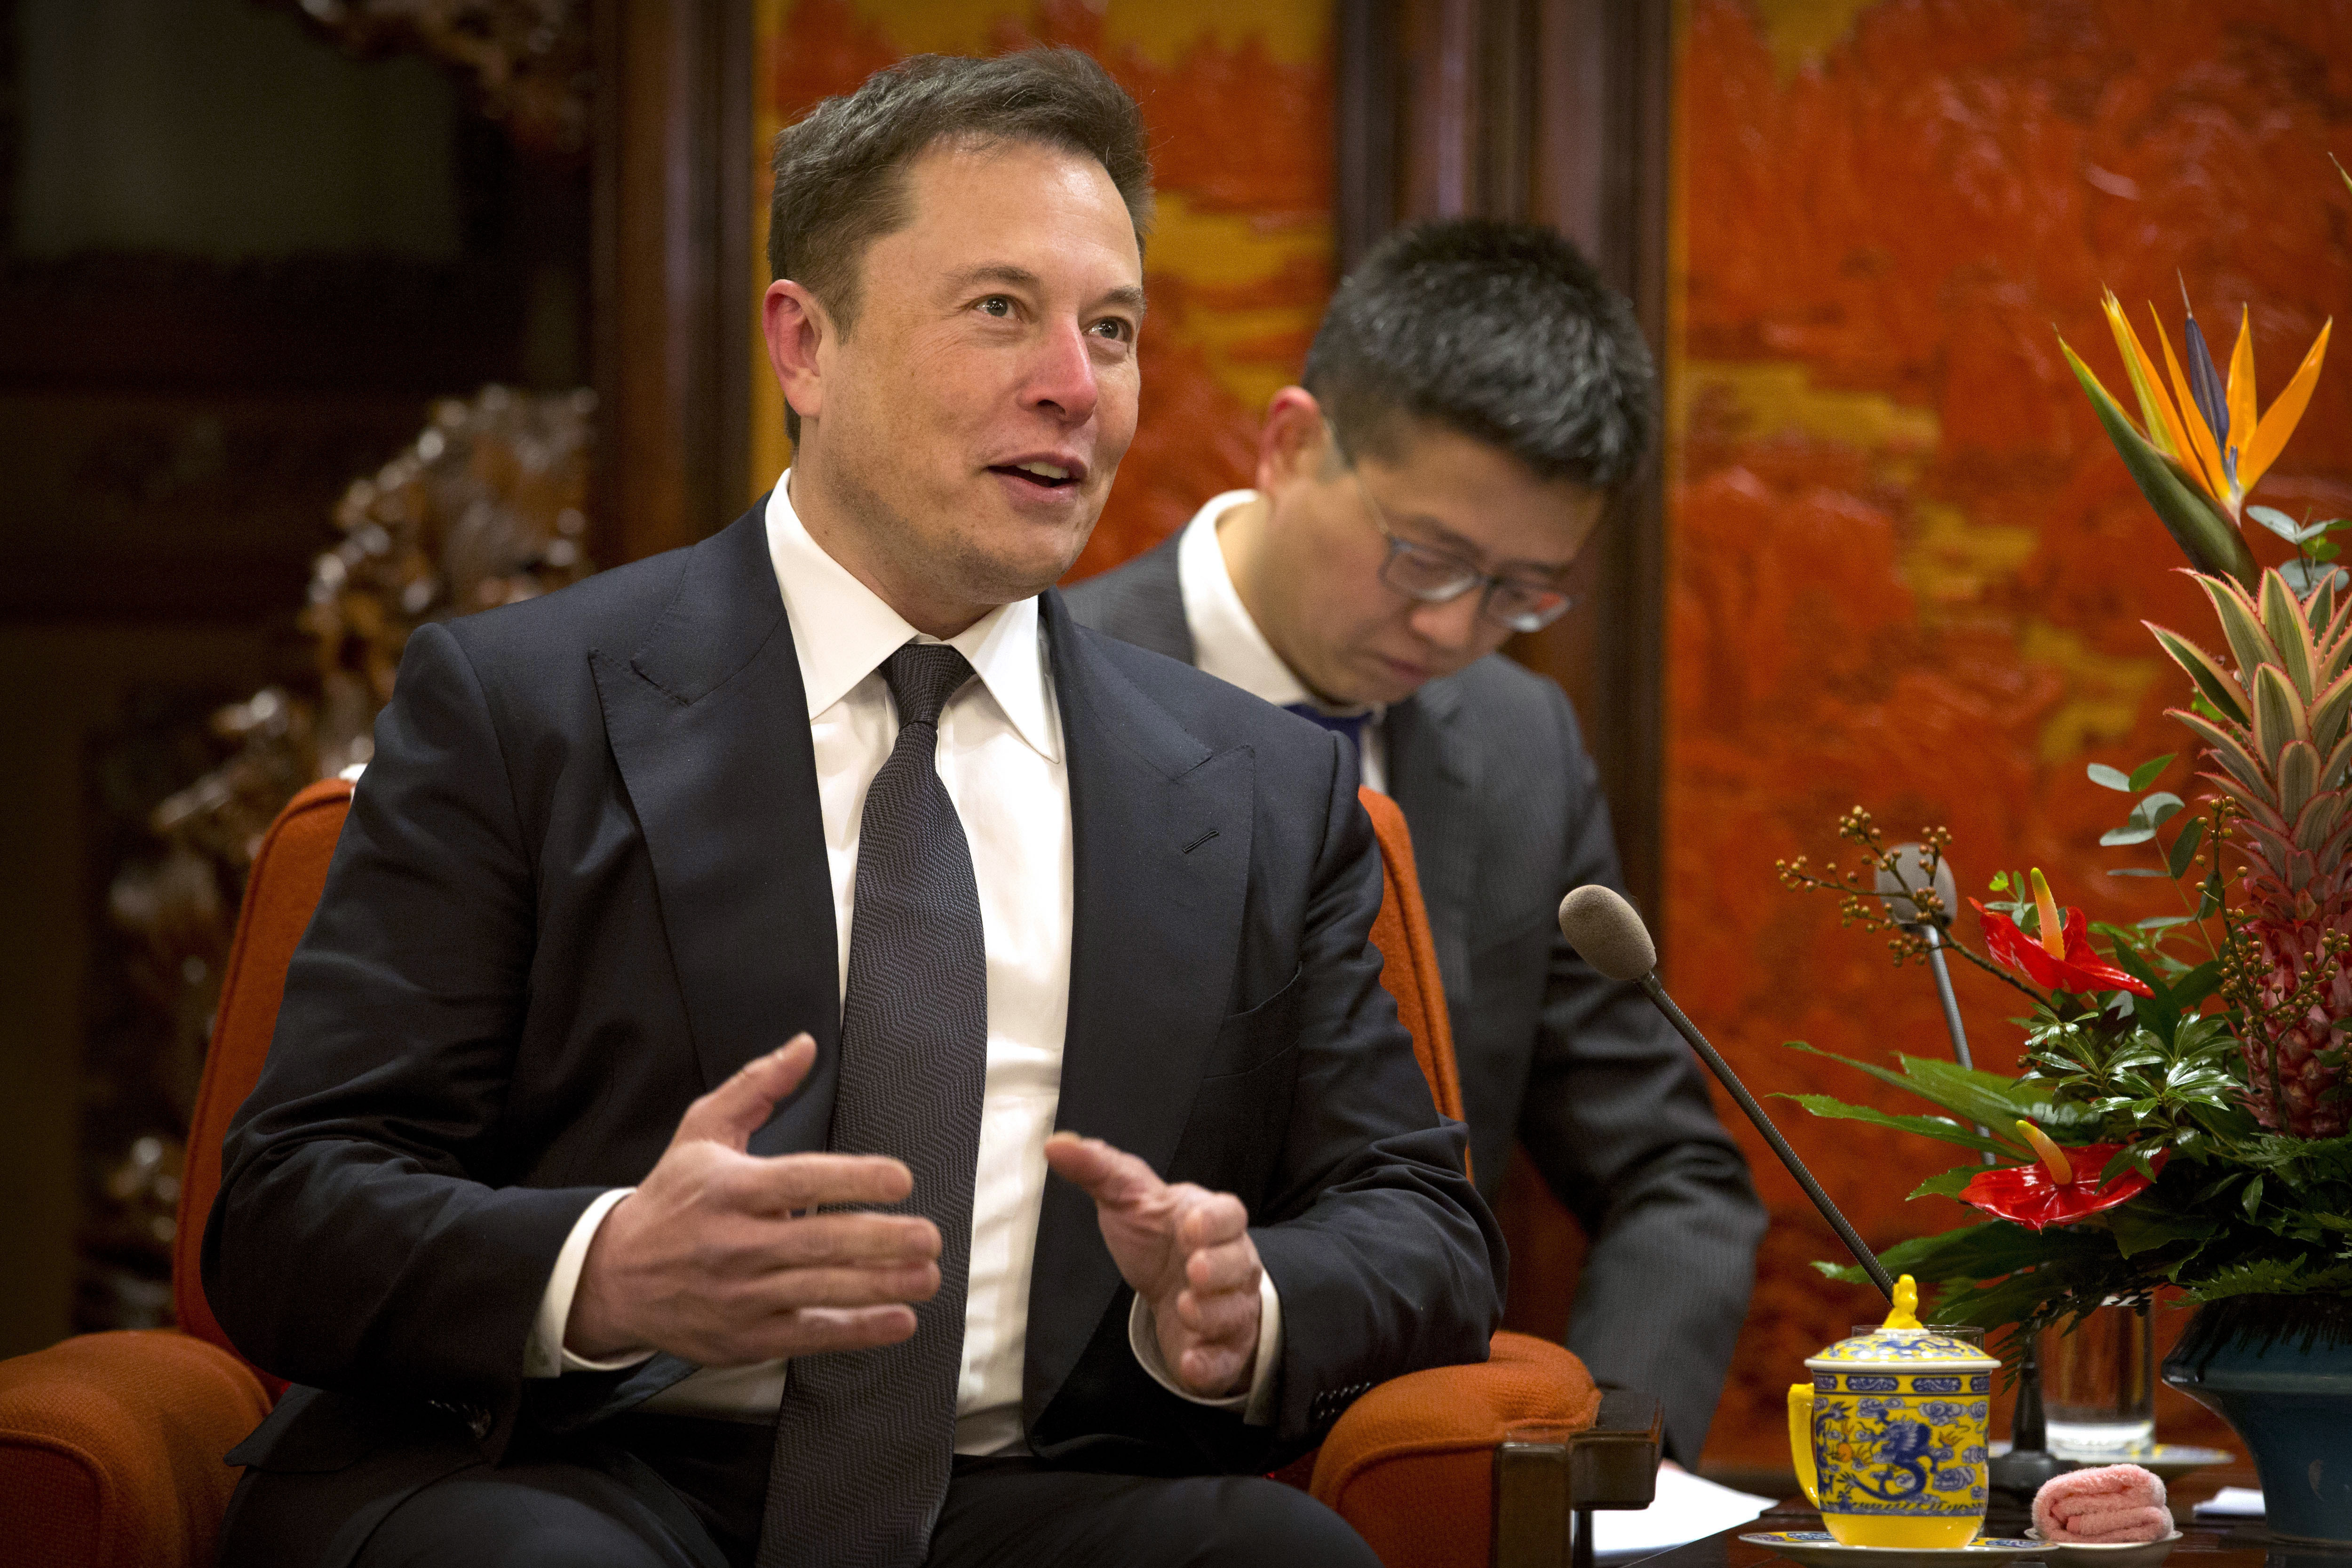 Tesla CEO Elon Musk speaks during a meeting with Chinese Premier Li Keqiang at the Zhongnanhai leadership compound in Beijing on Jan. 9.